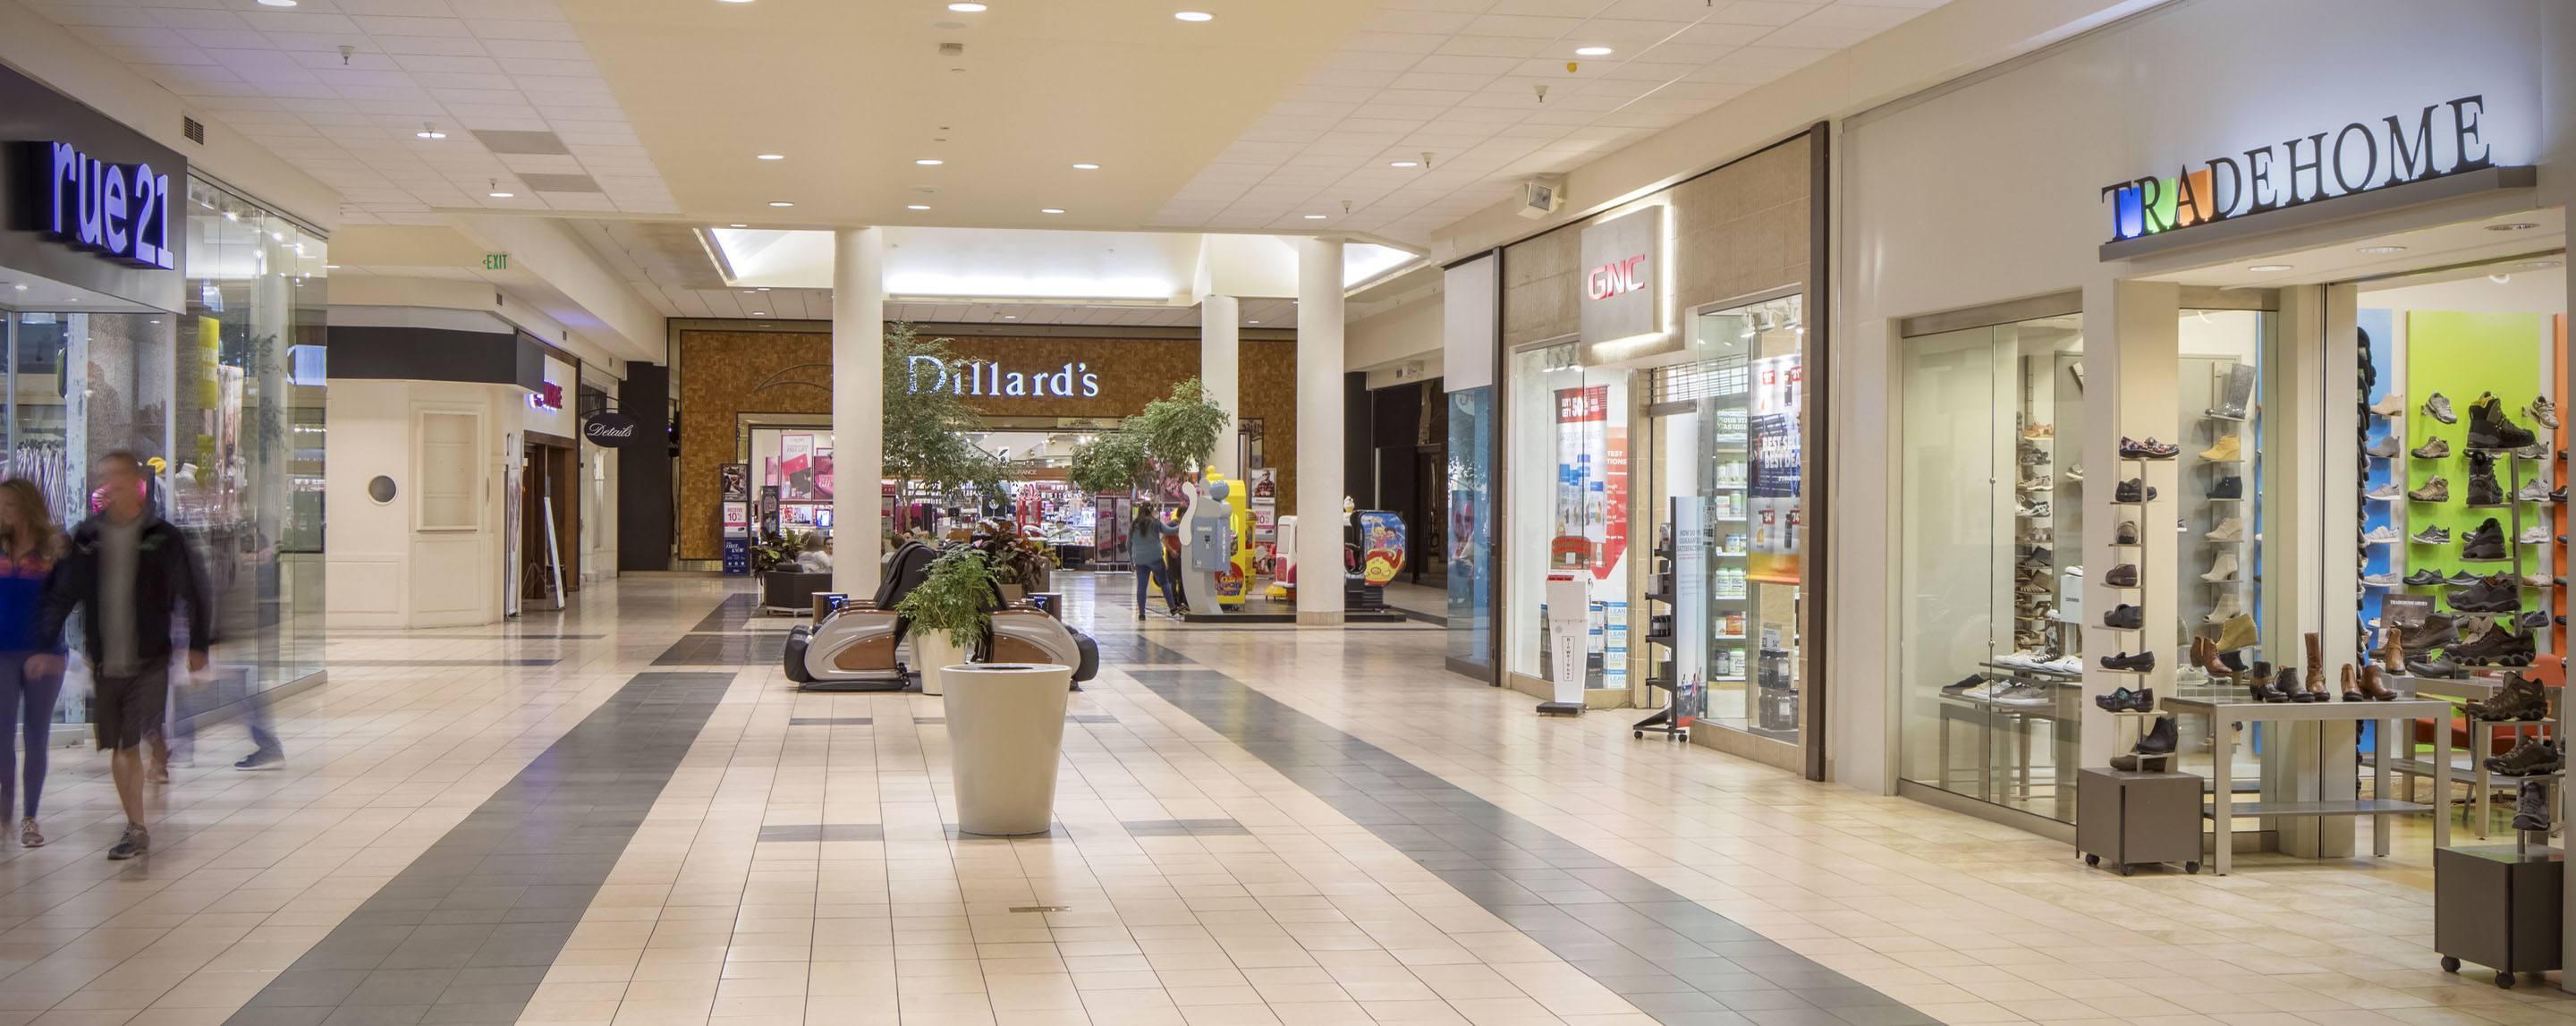 A Dillards store is situated next to a Trade Home store and a Rue 21 store inside of an indoor shopping mall.